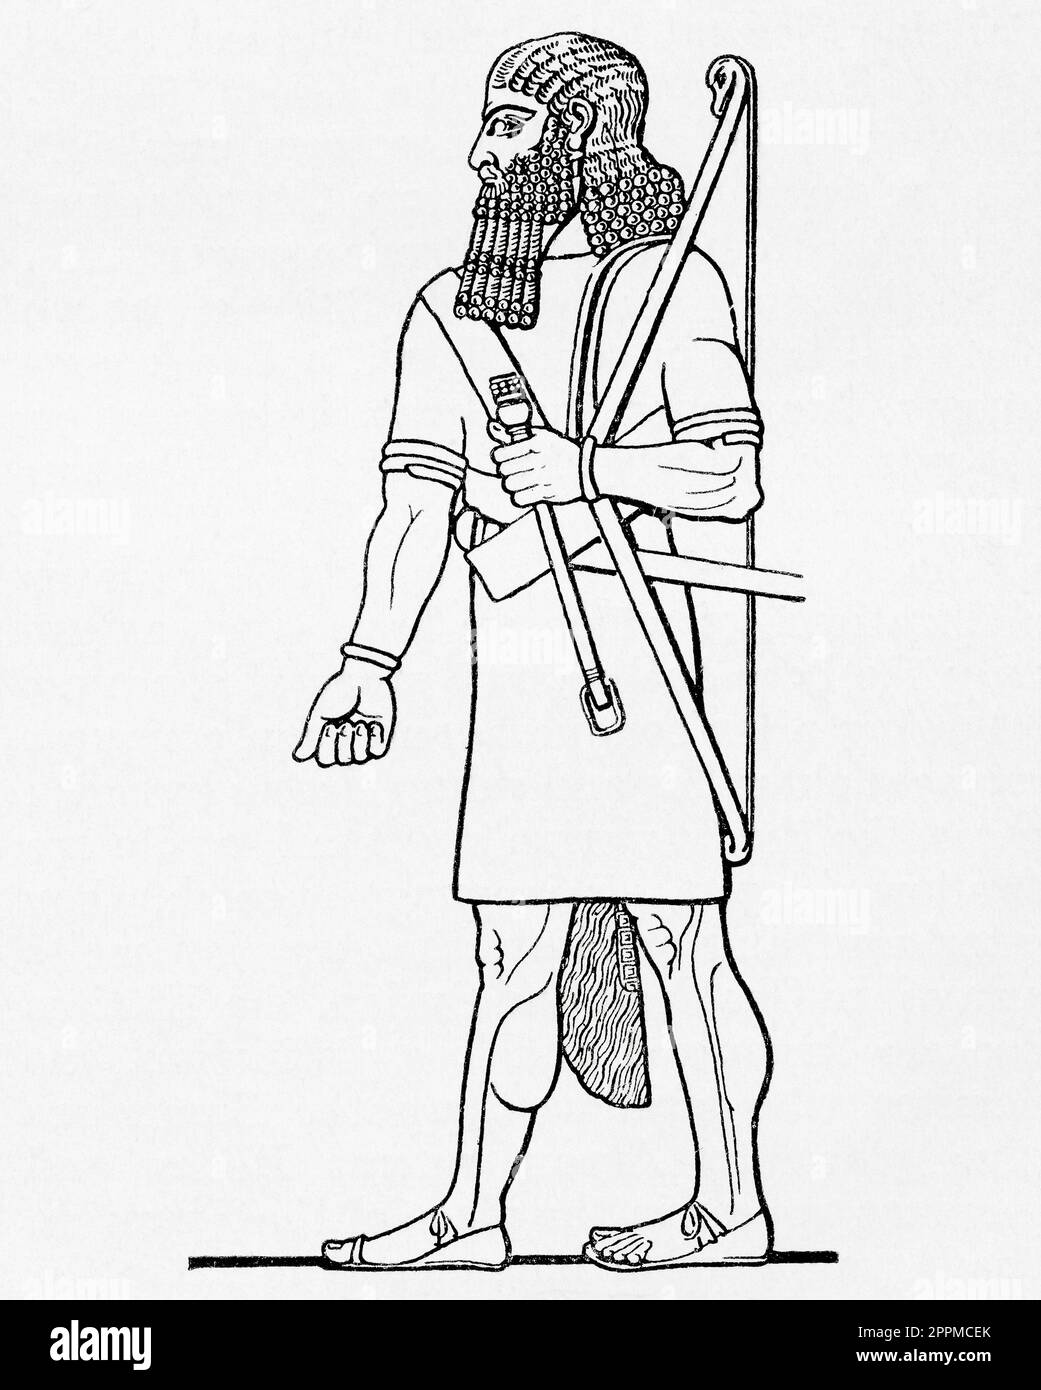 An Assyrian warrior.  From the book Outline of History by H.G. Wells, published 1920. Stock Photo